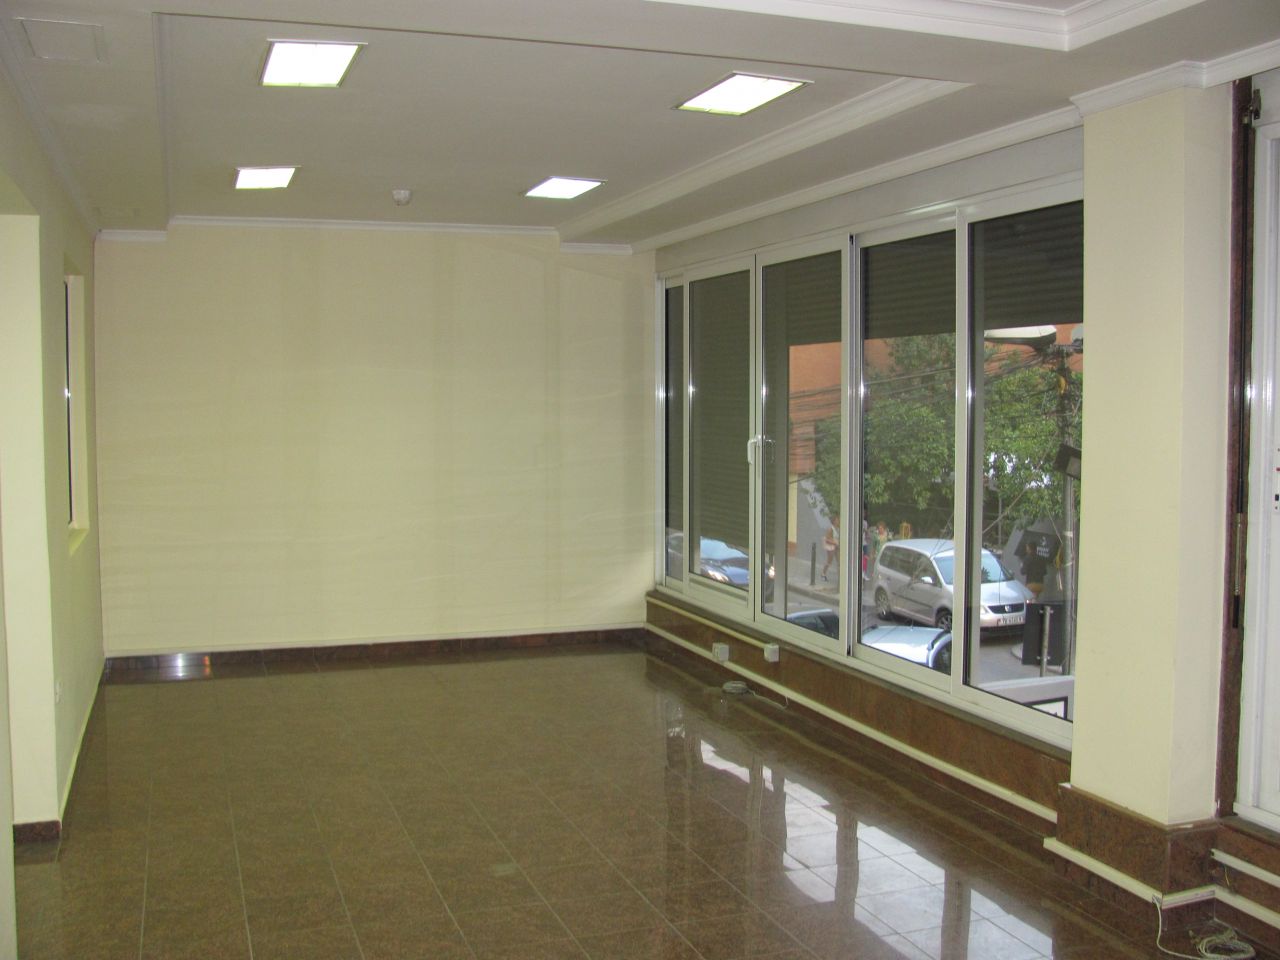 Office Space for Rent in Tirane. Office for Rent in Blloku Area